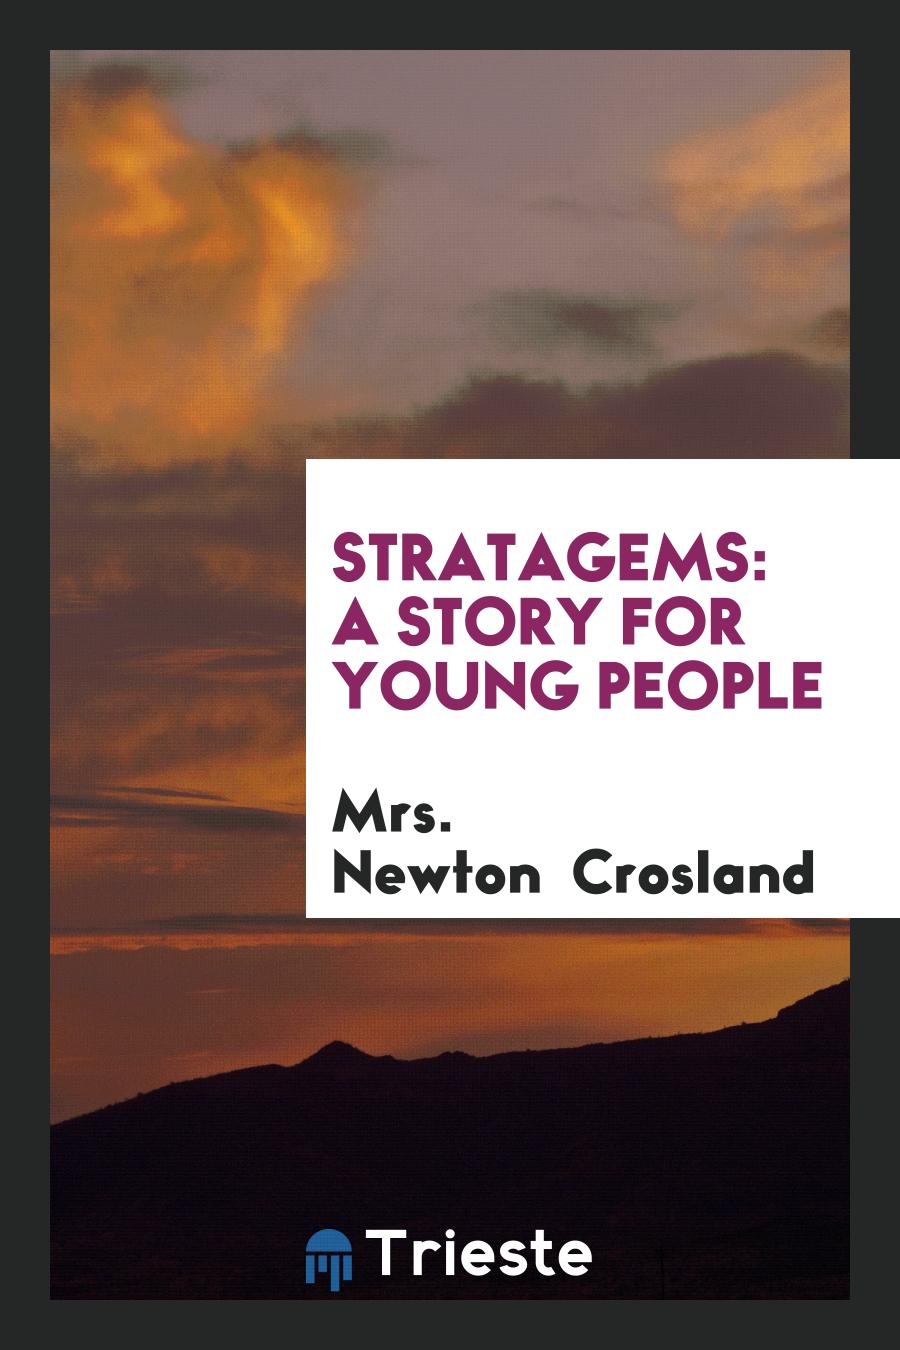 Stratagems: A Story for Young People